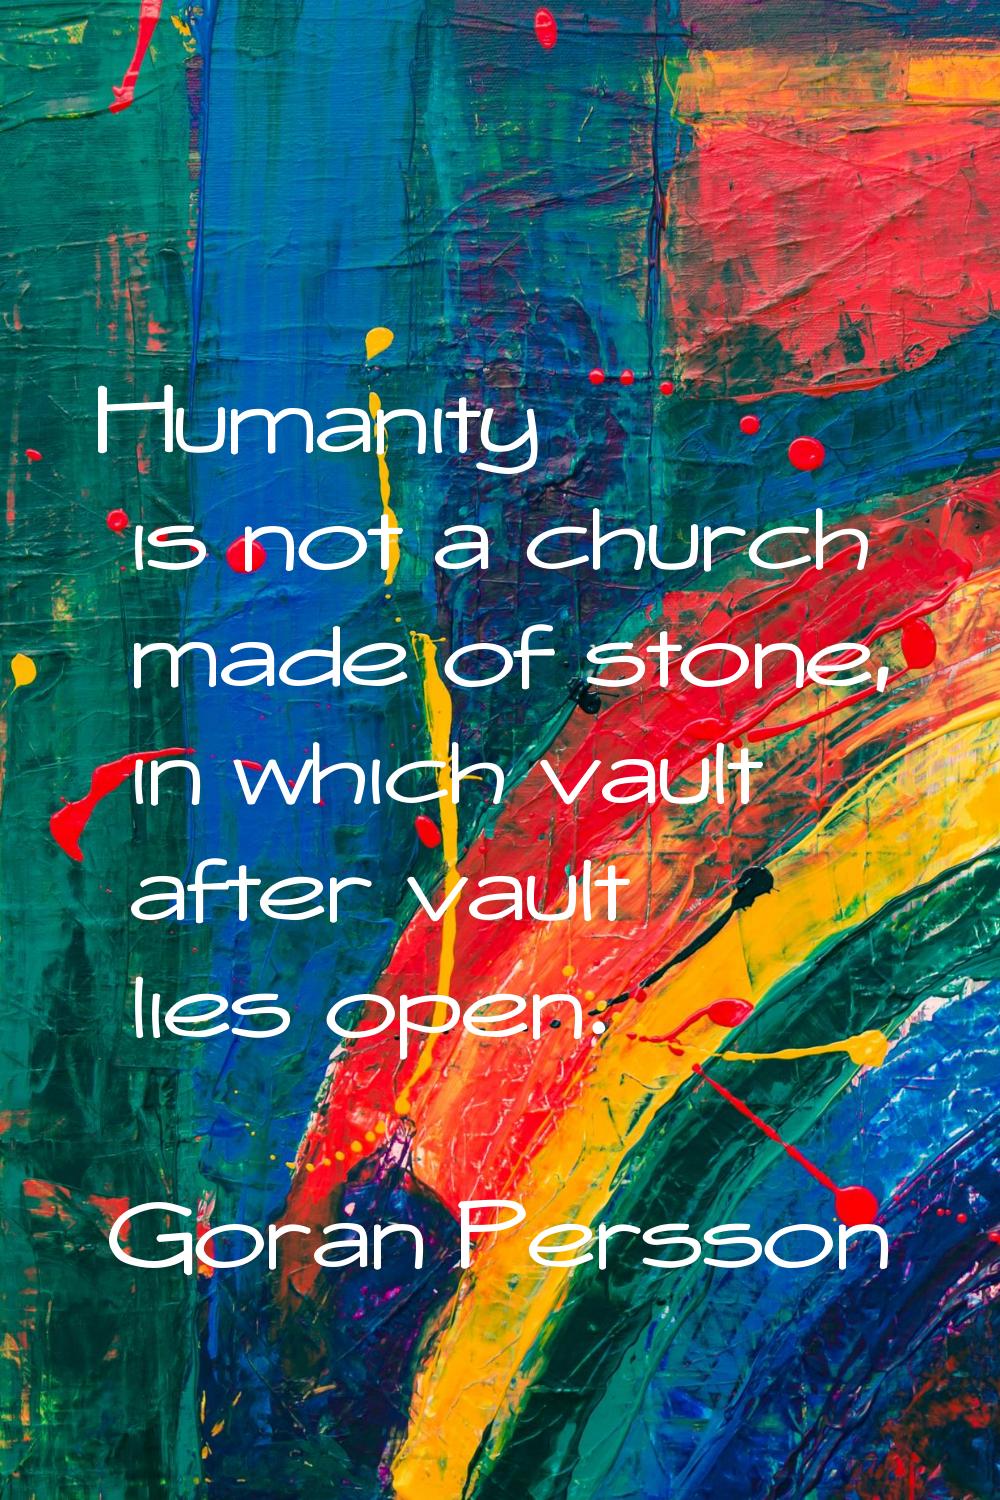 Humanity is not a church made of stone, in which vault after vault lies open.